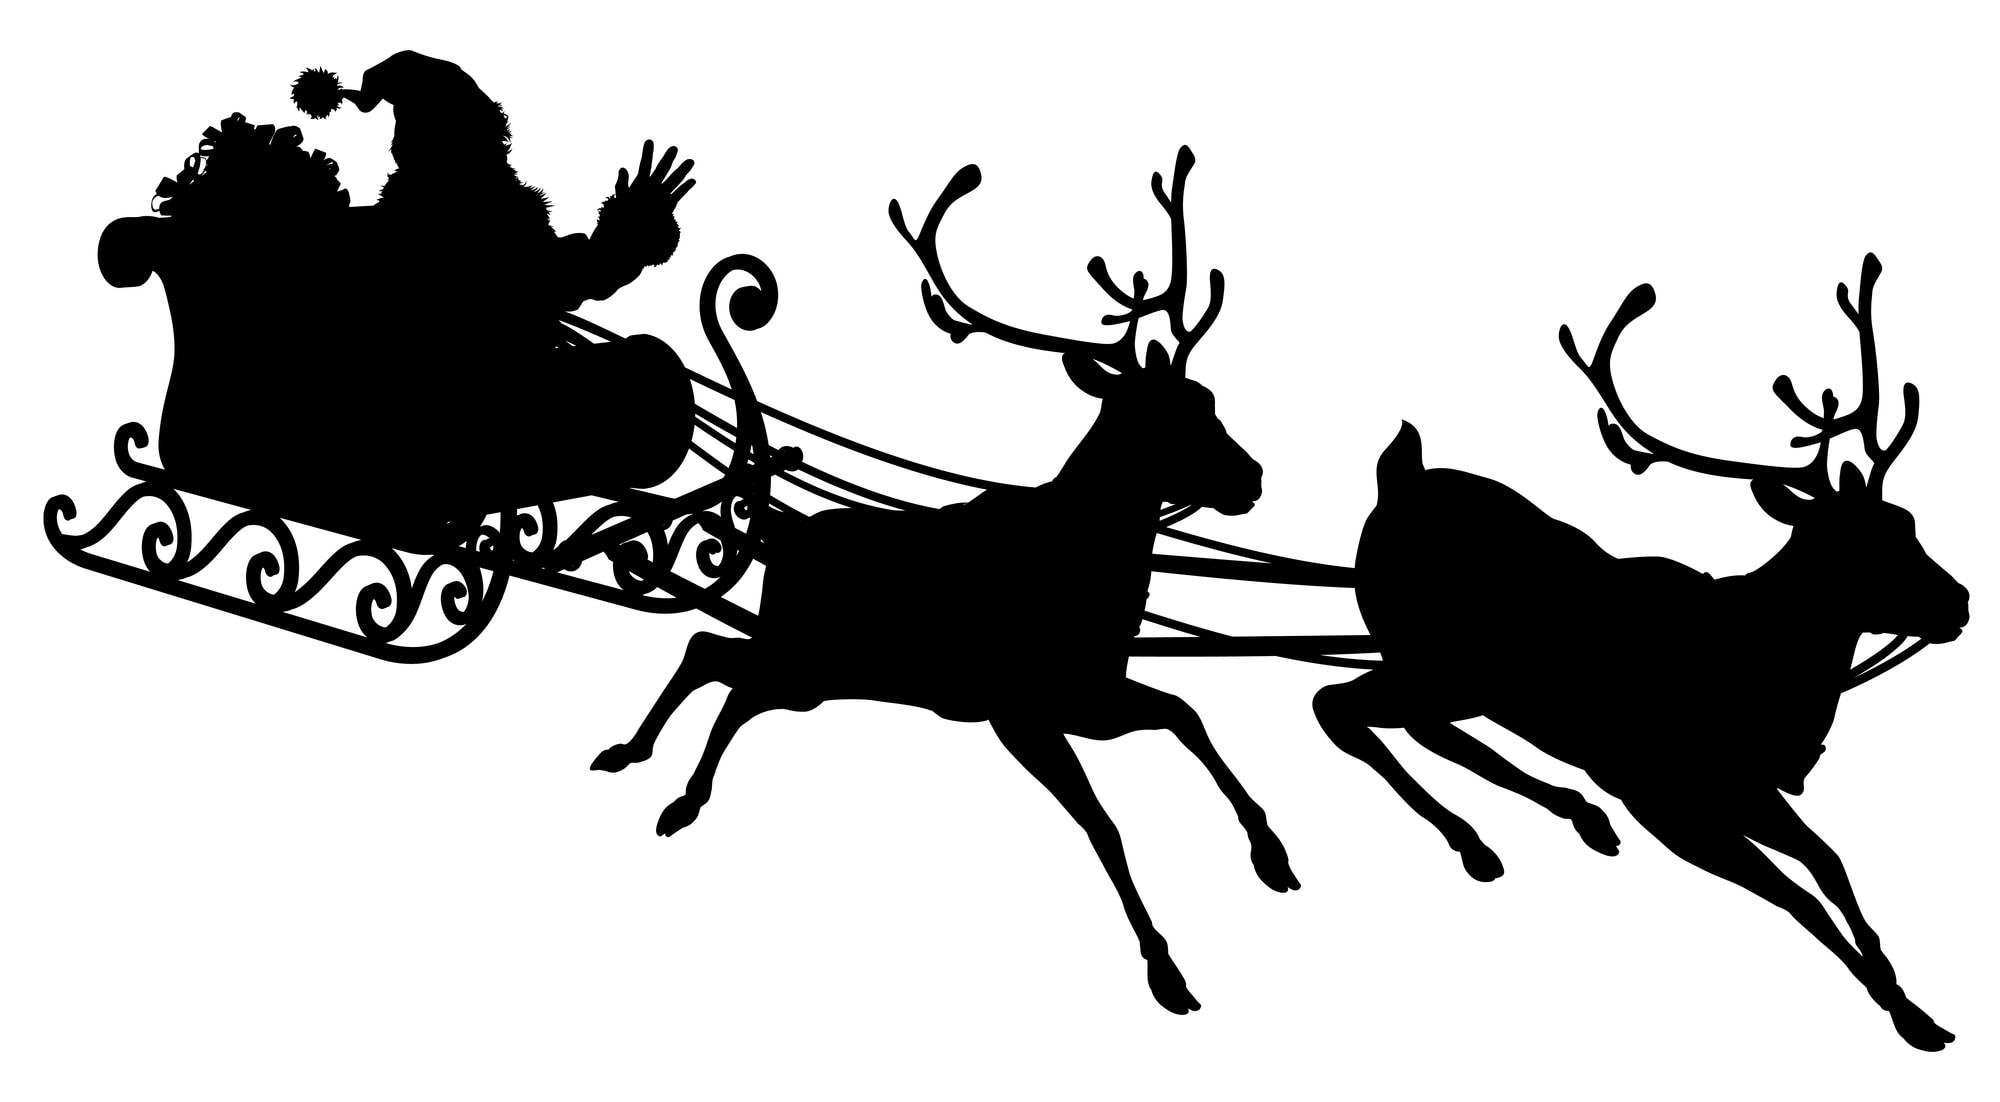 Santa Sleigh Silhouette illustration of Santa Claus in his sleigh flying through the sky being pulled by his reindeer